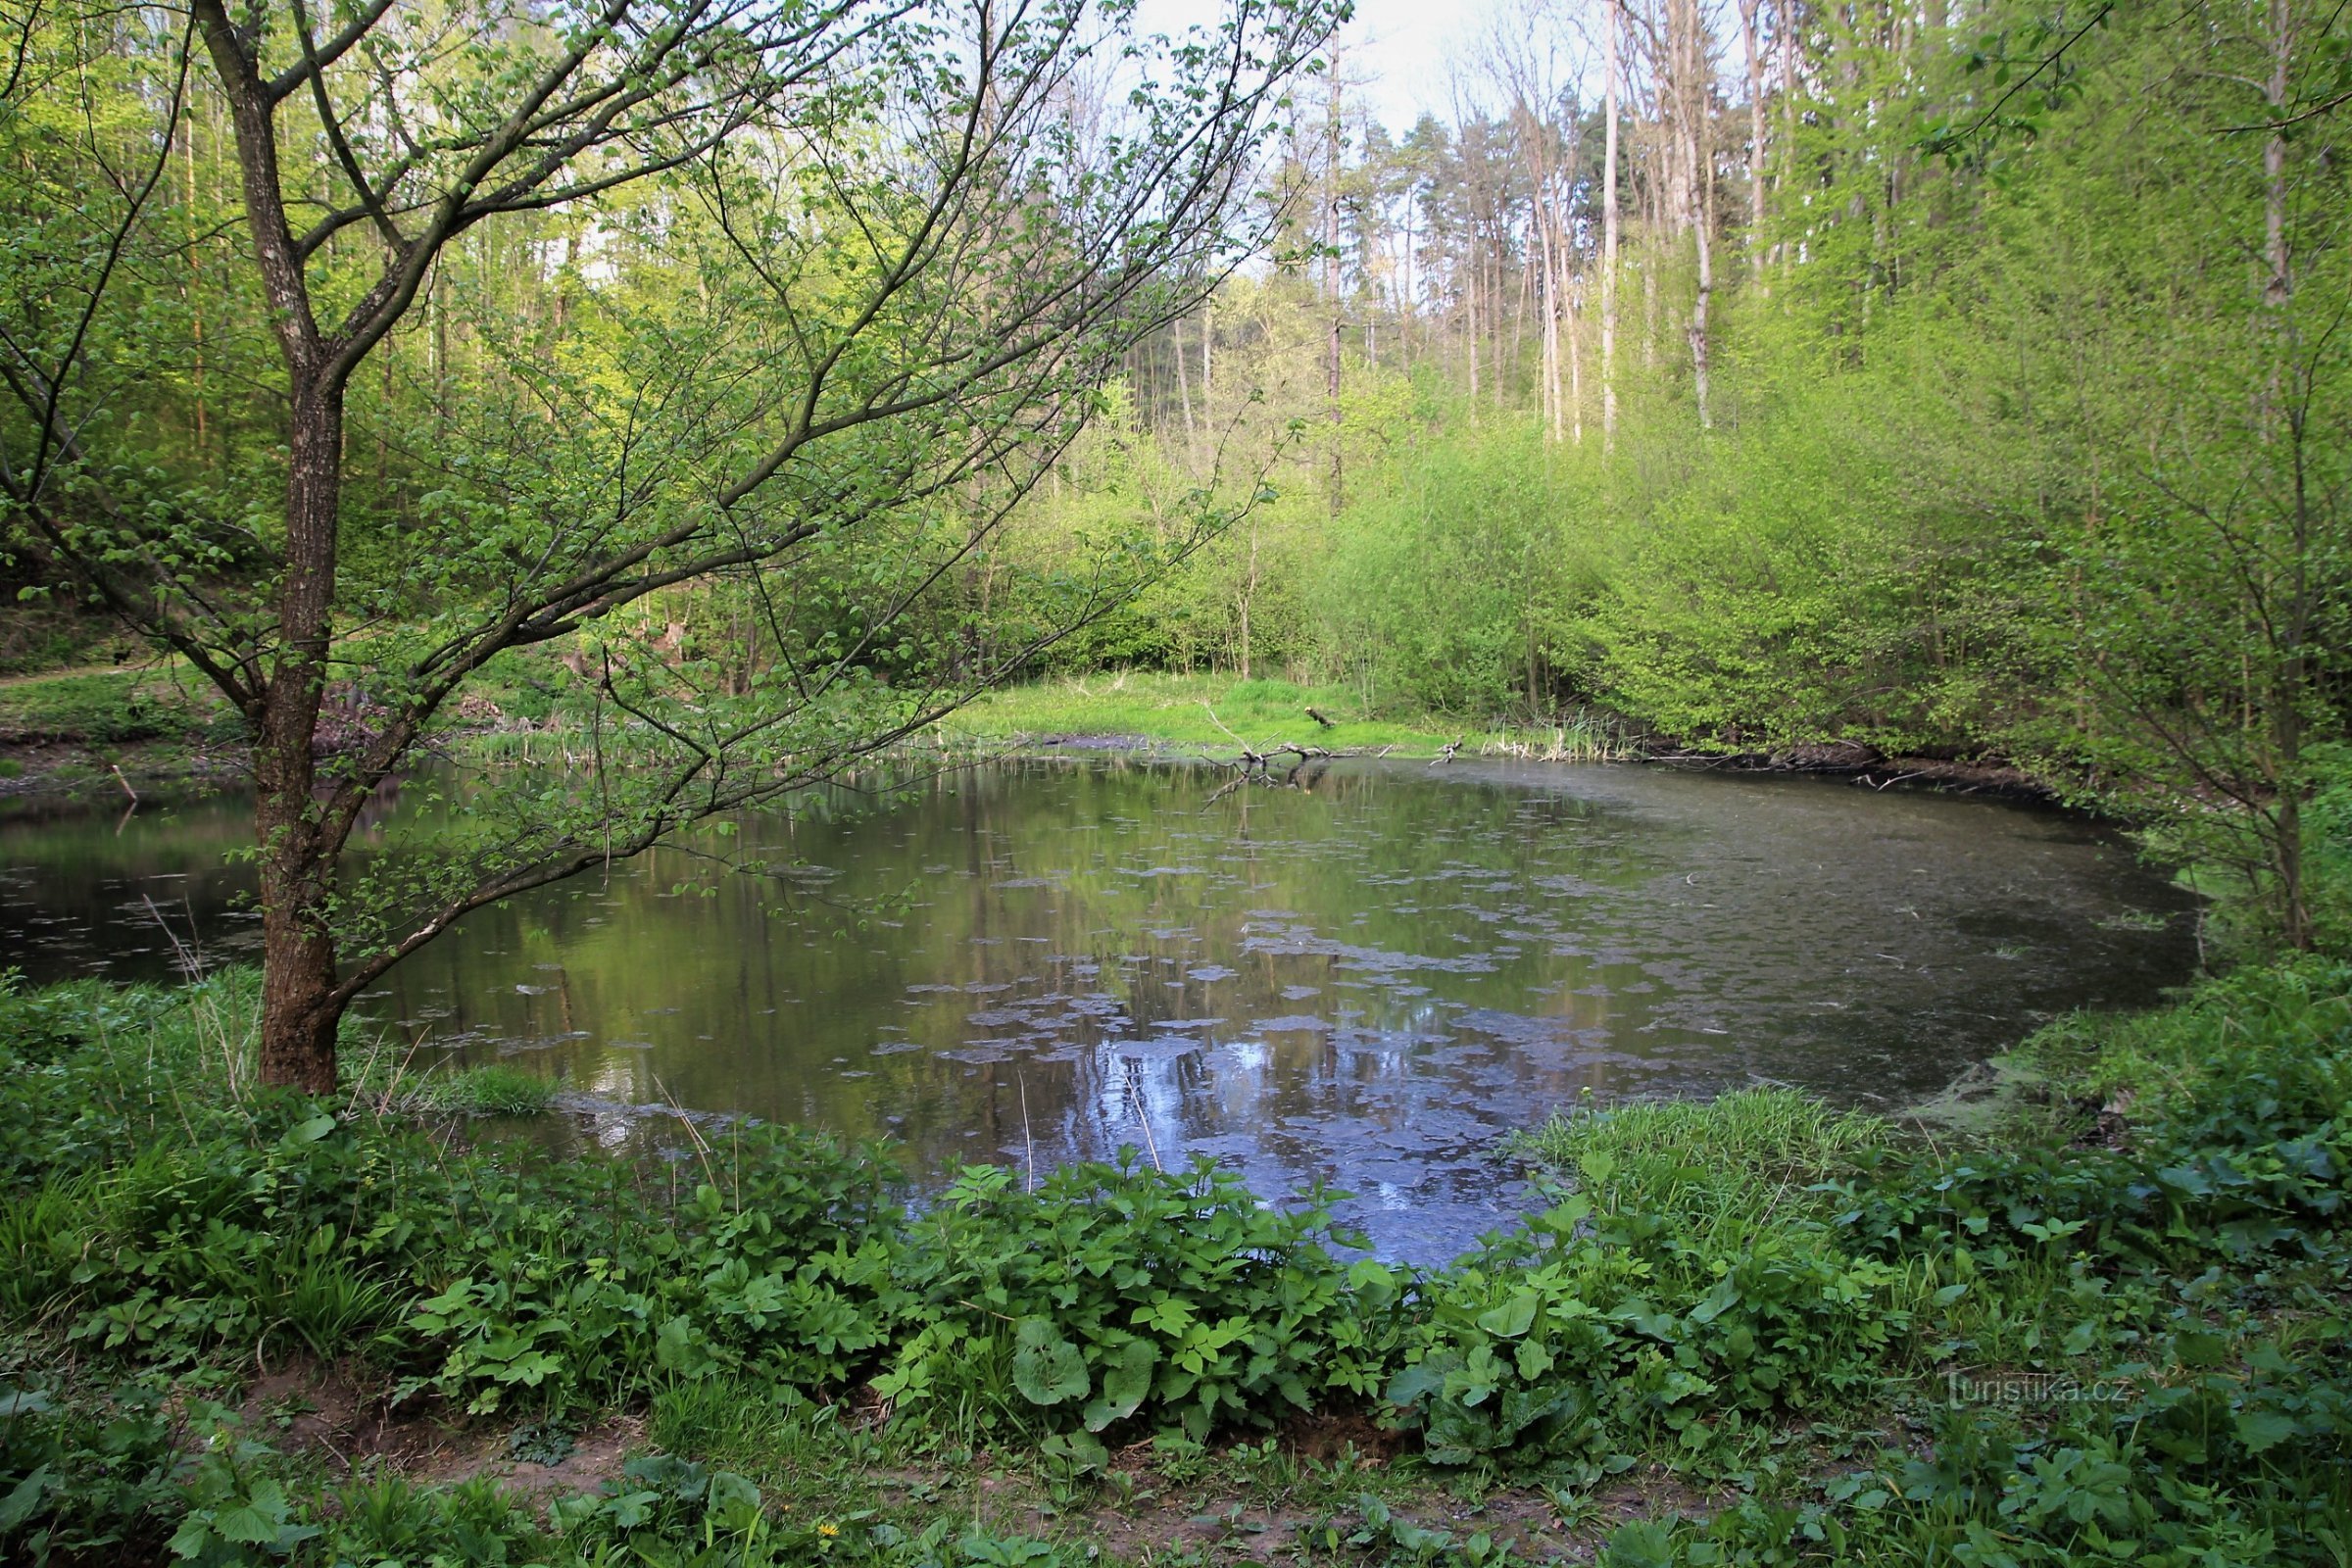 View of the main overgrown pond